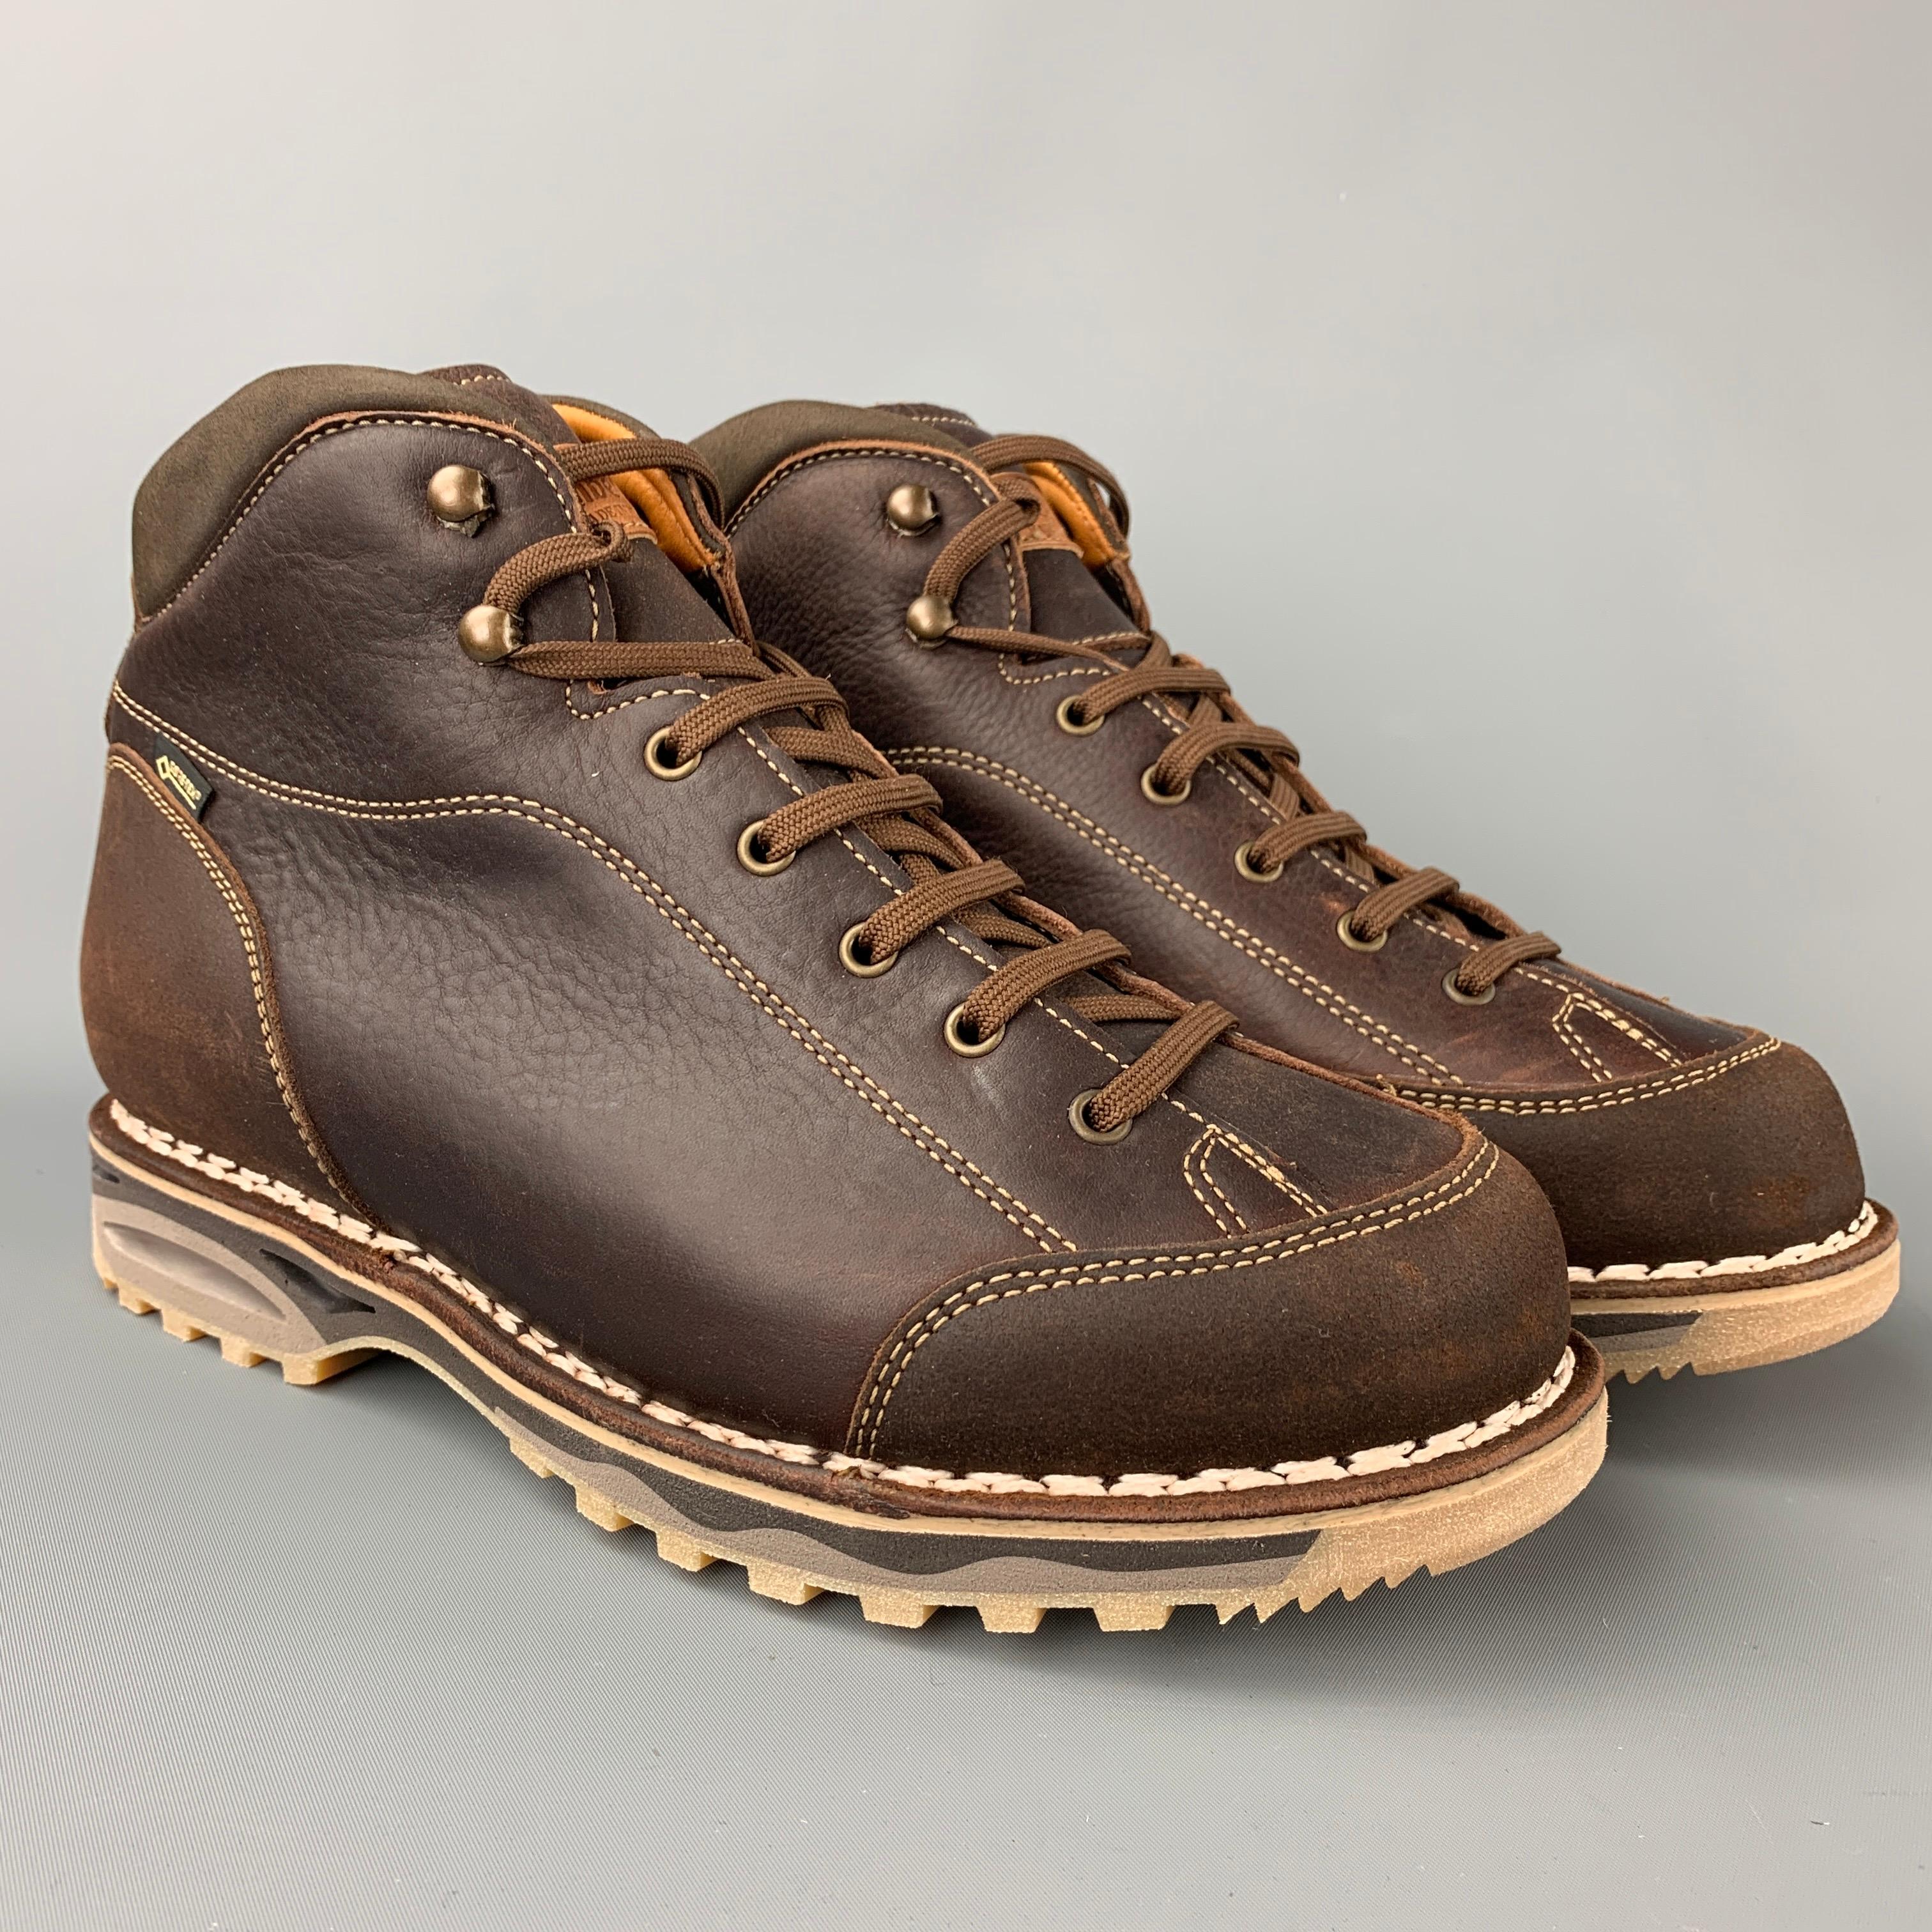 ZAMBERLAN boots comes in a brown leather with contrast stitching featuring a hiking style, gore-tex, vibram sole, and a lace up closure. Comes with dust bag. Made in Italy.

Brand New. 
Marked: US 9 / EU 43
Original Retail Price: